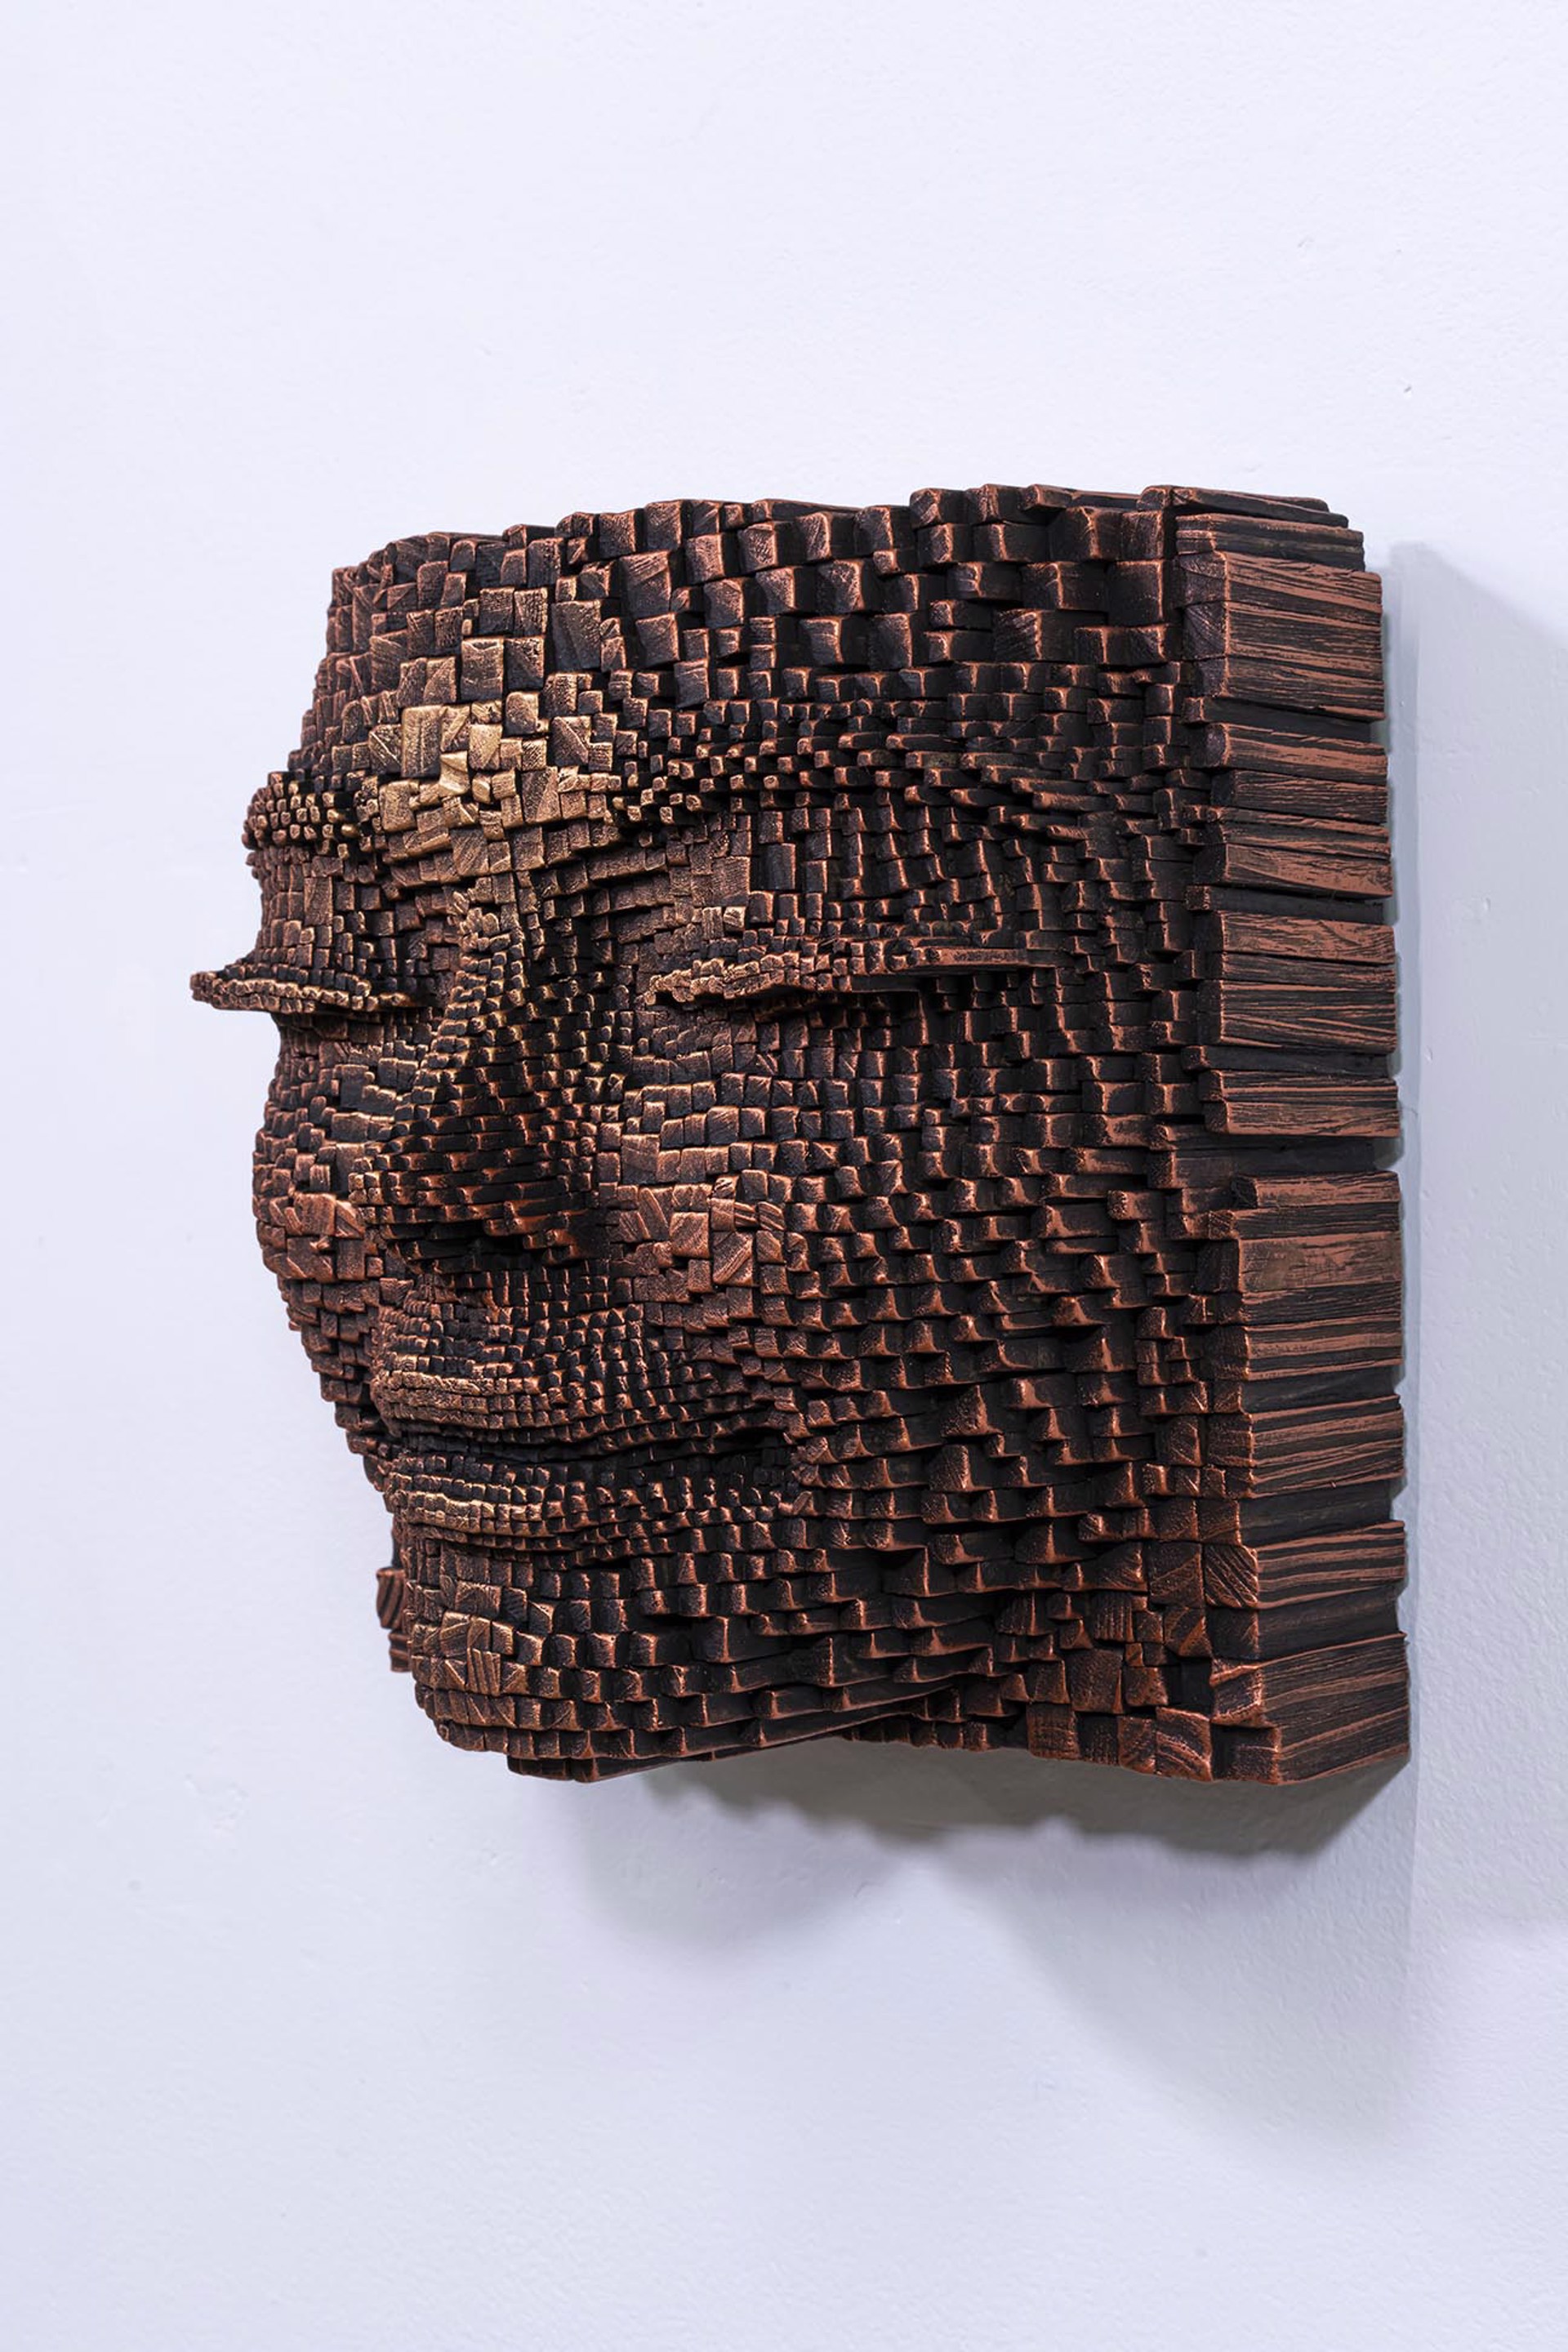 Mask #280 by Gil Bruvel